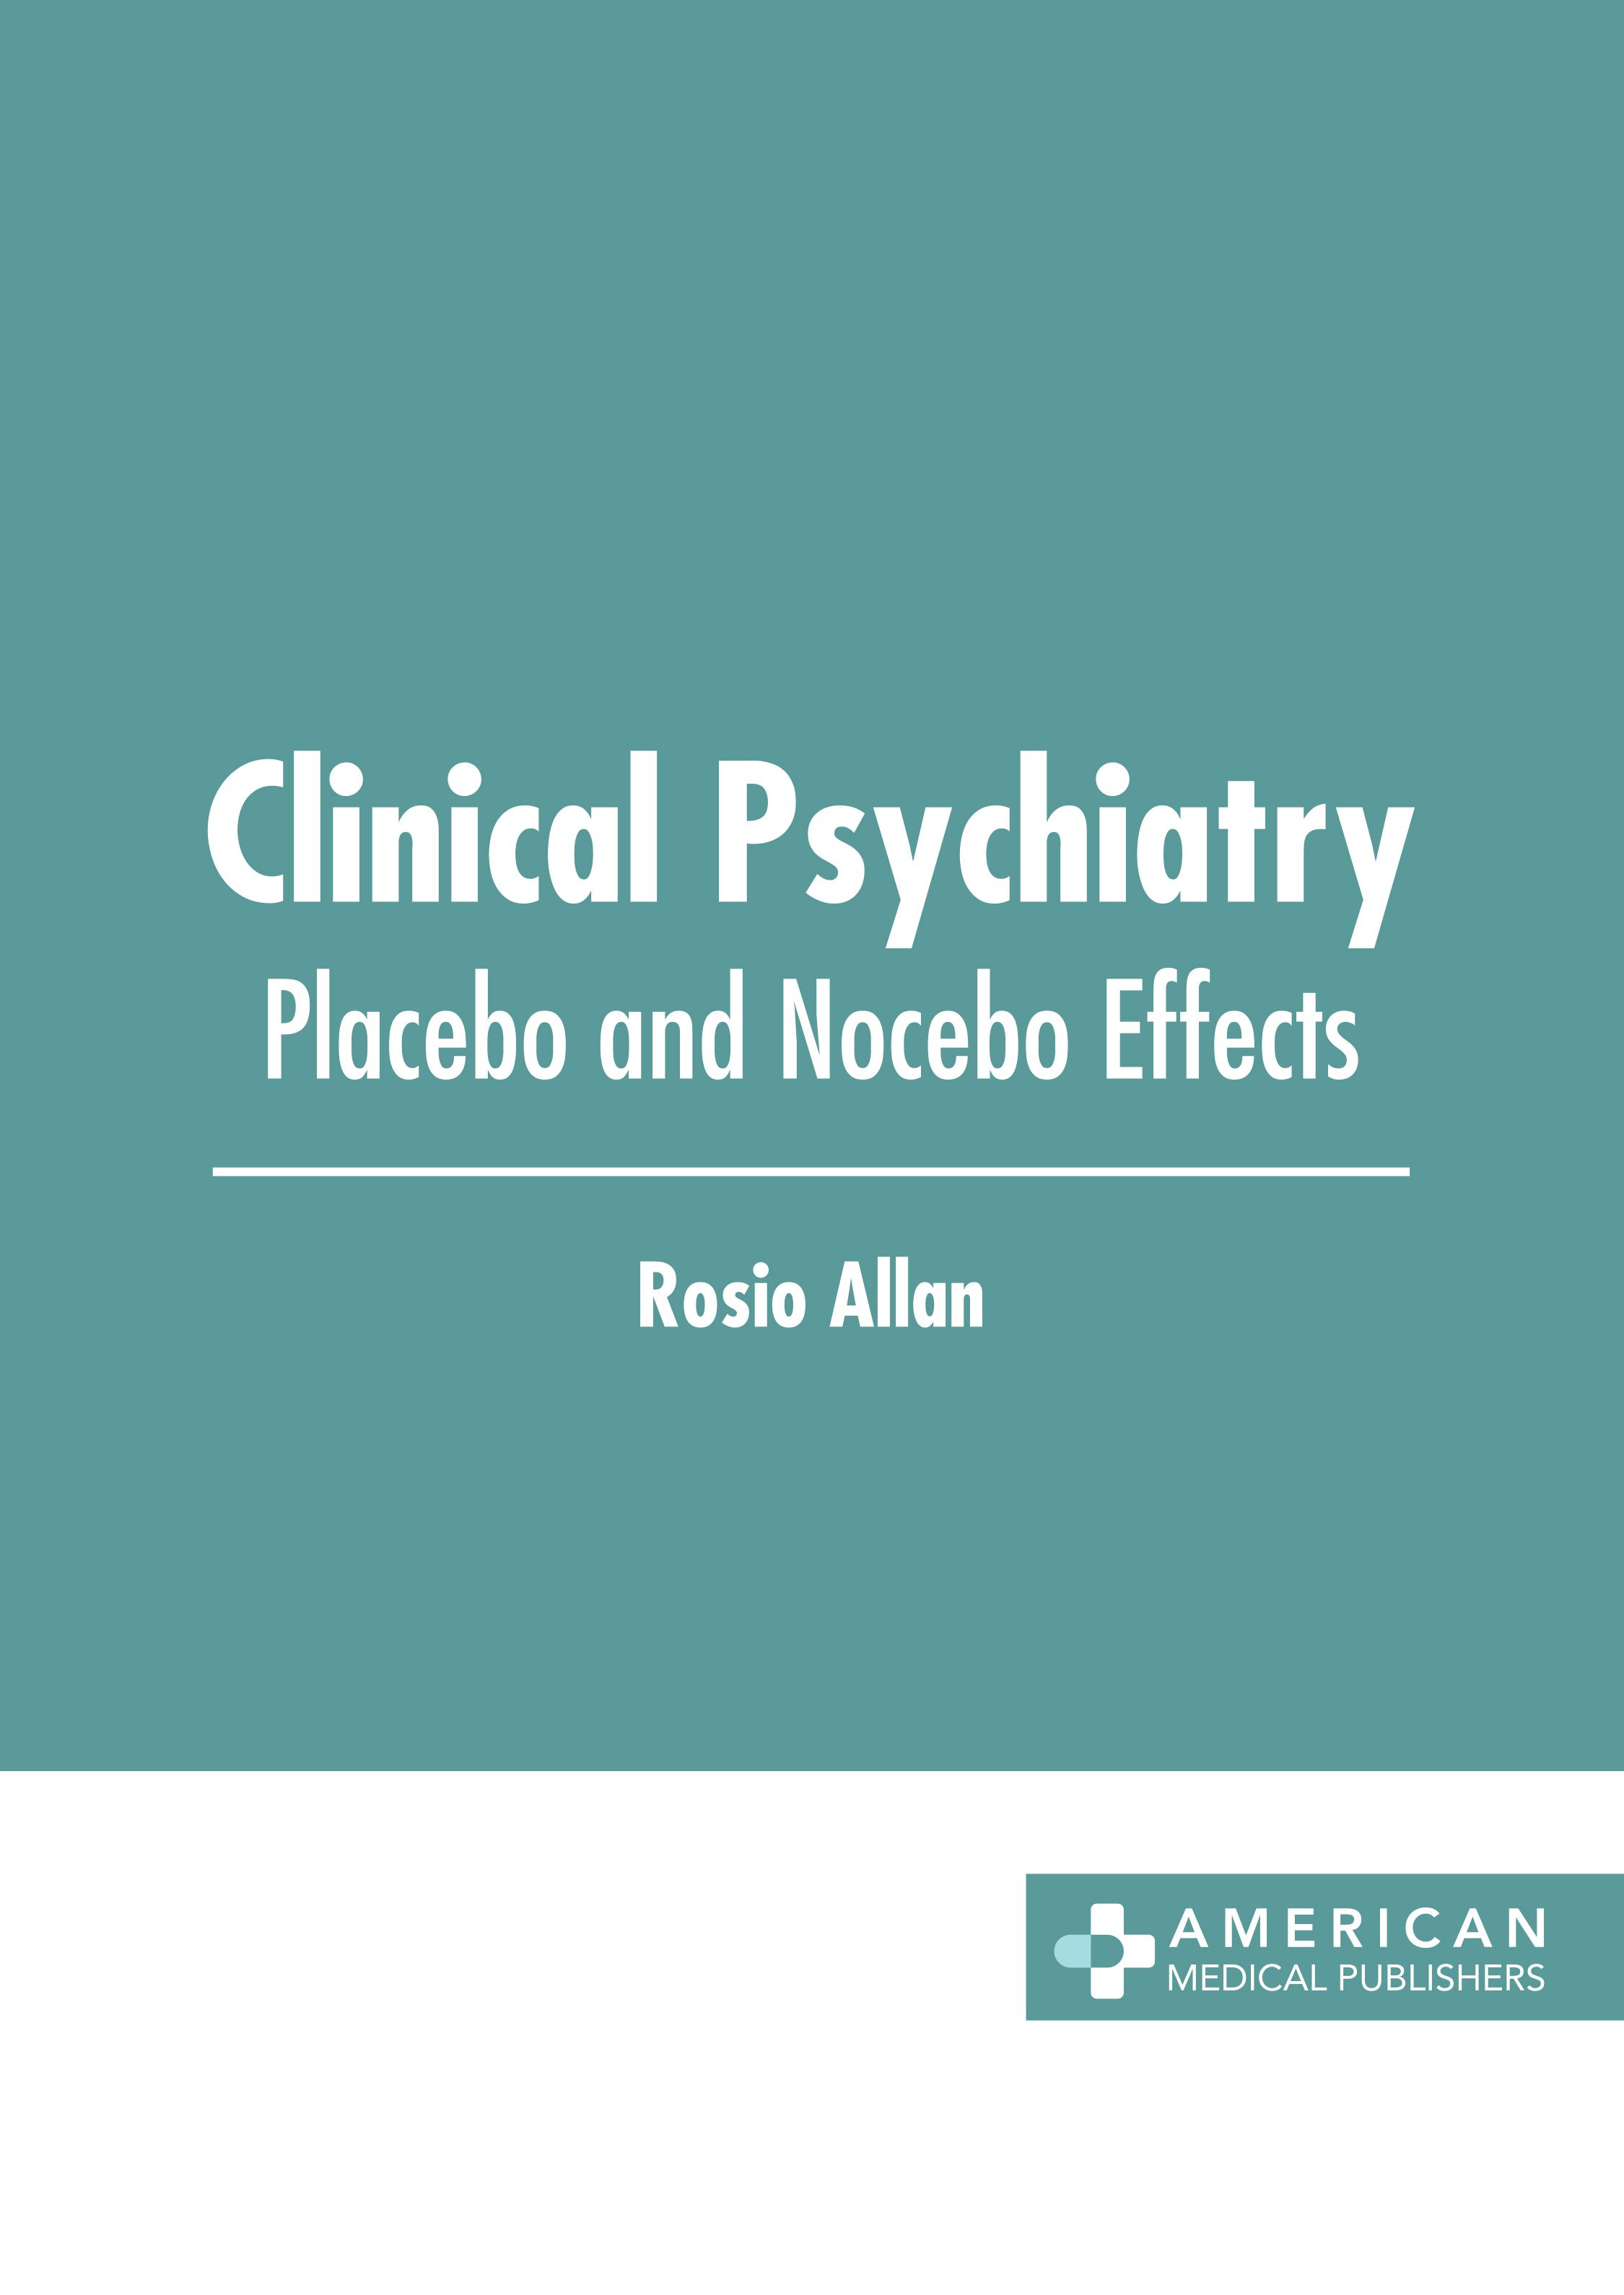 medical-reference-books/psychiatry/clinical-psychiatry-placebo-and-nocebo-effects-9798887400075